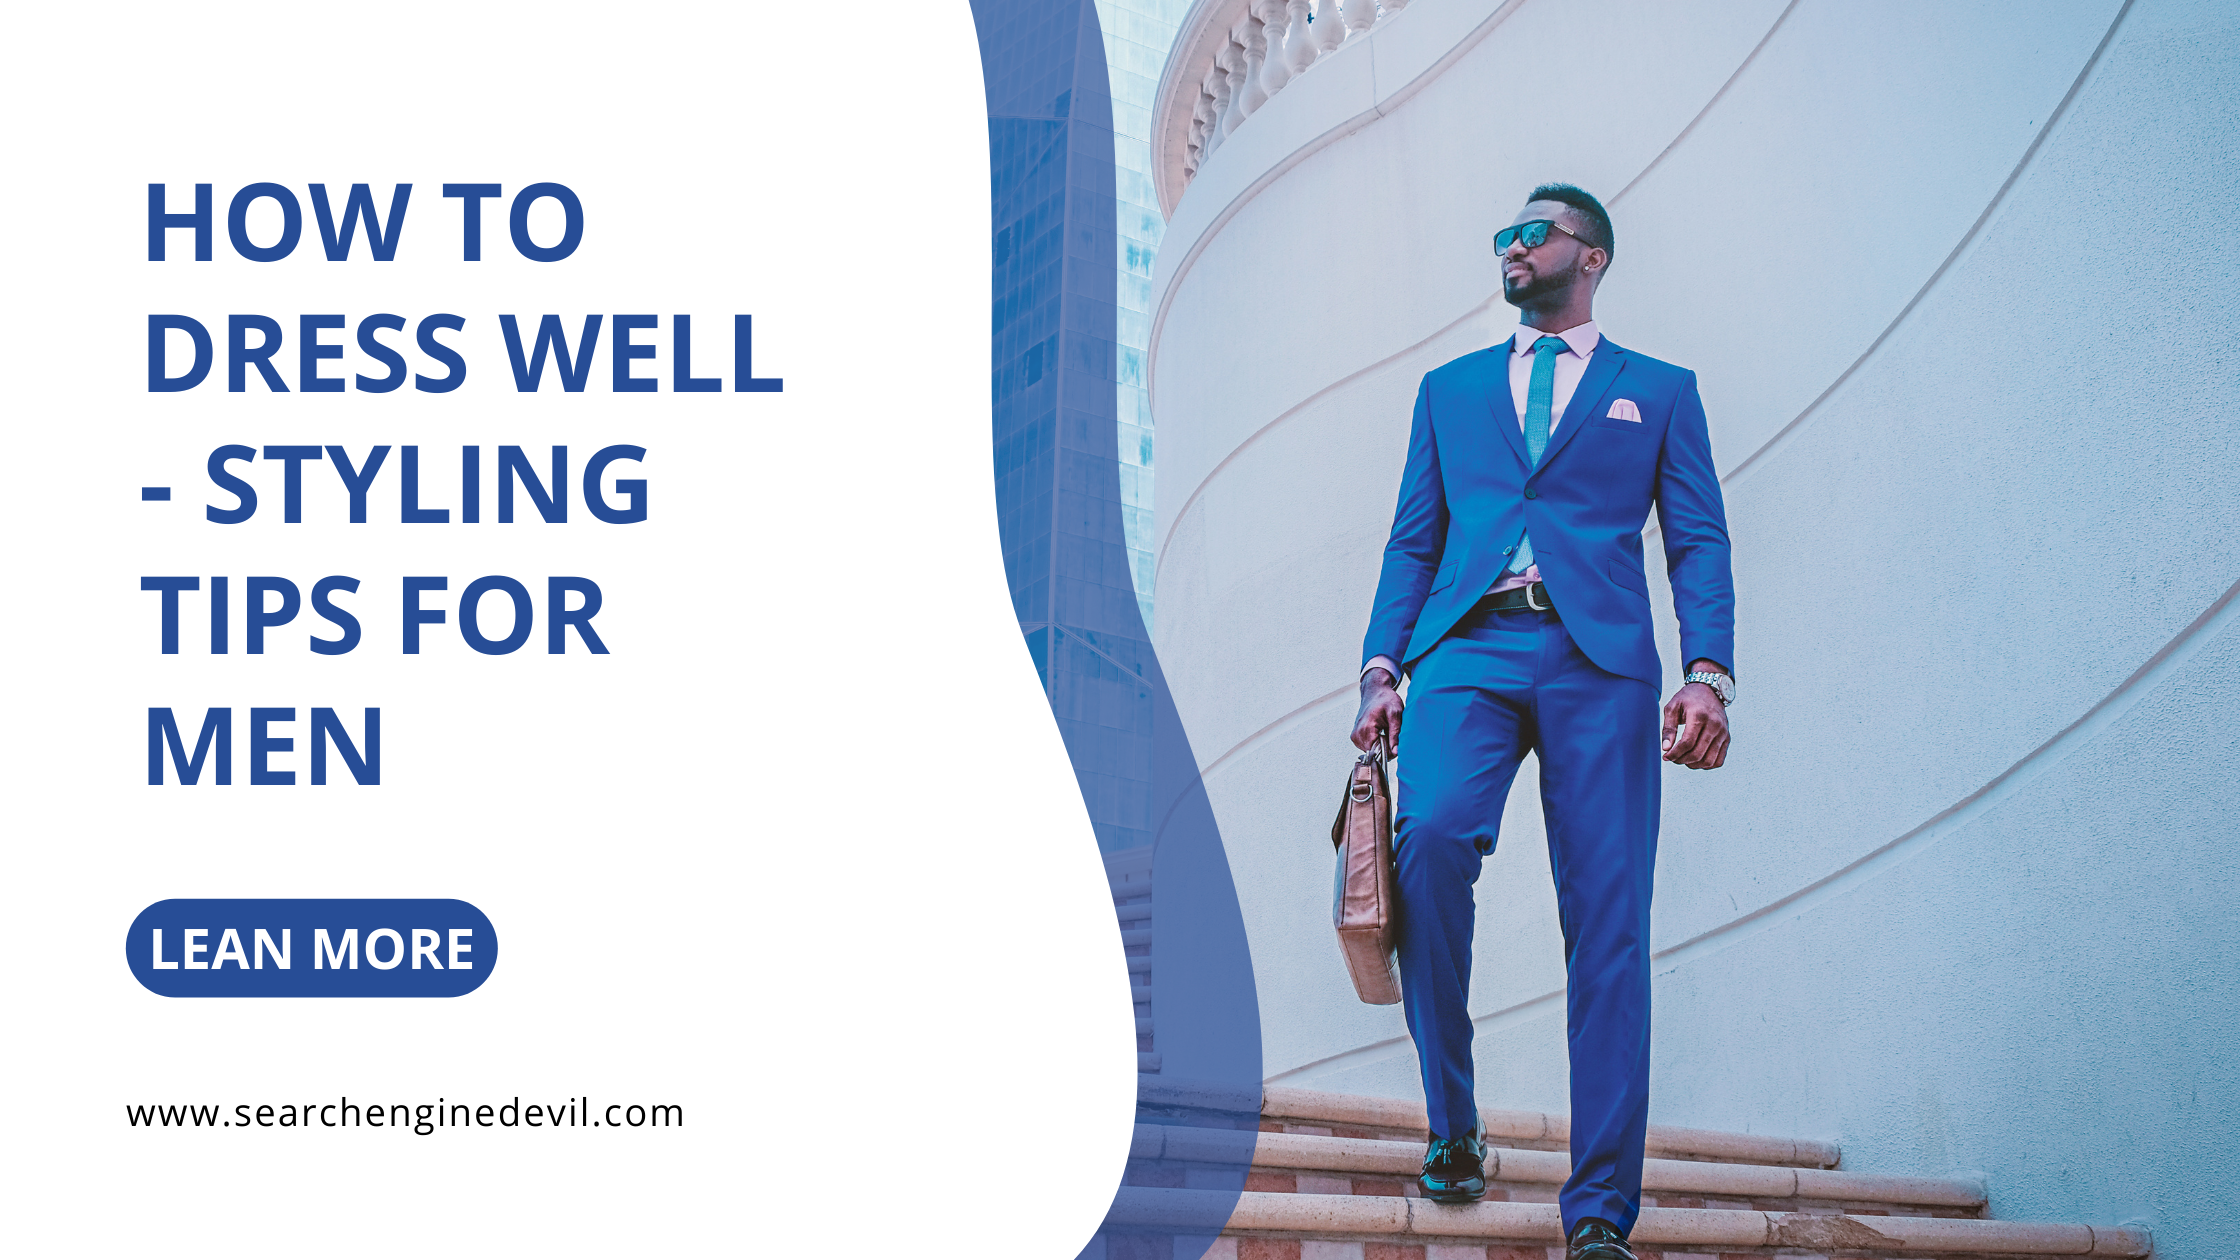 How To Dress Well - Styling Tips For Men